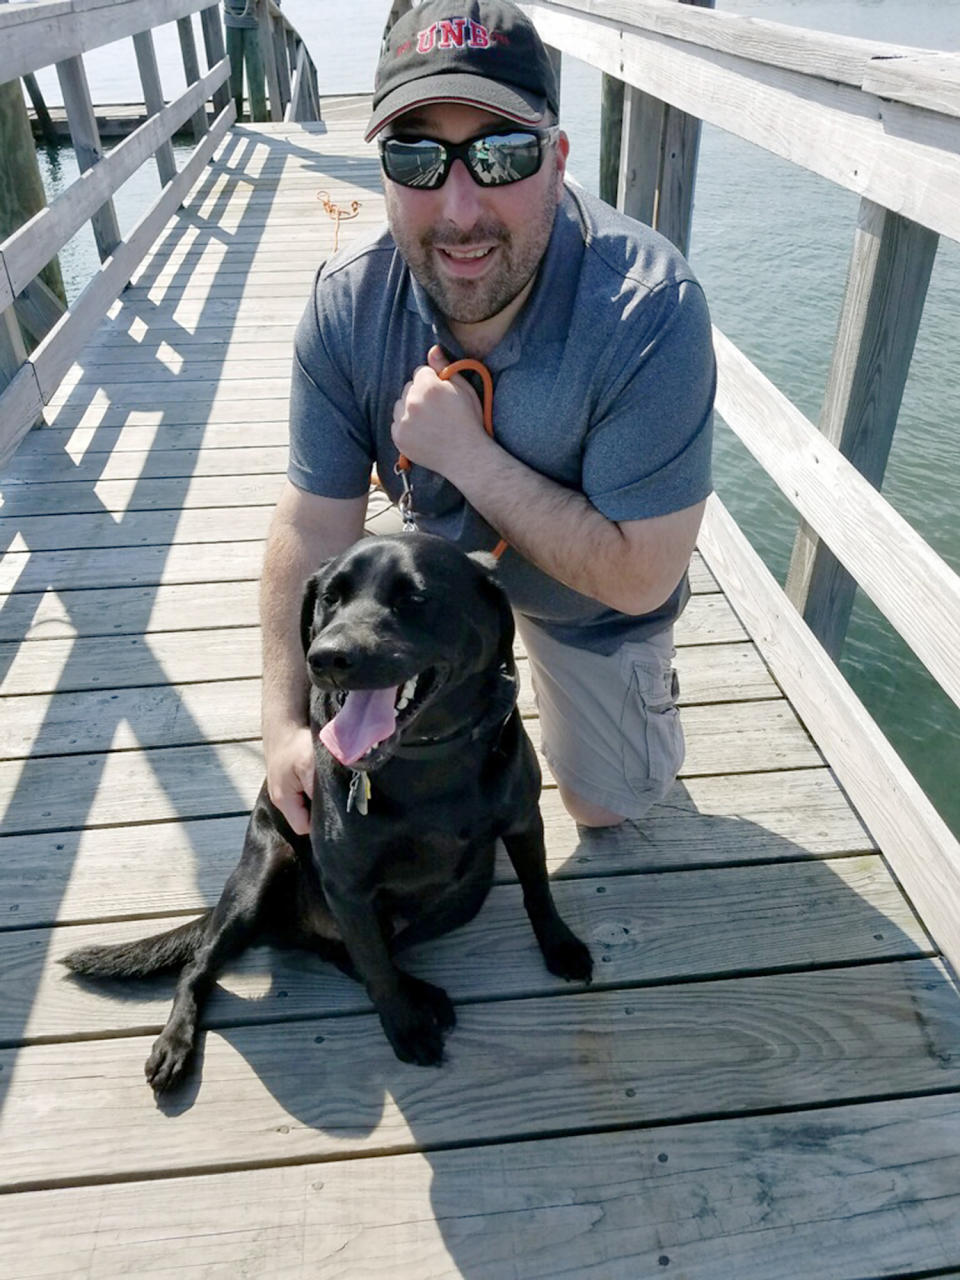 CORRECTS TO BELLOCCHIO, NOT BELLOCCIO - This August 2019 photo provided by Josh Bellocchio shows his brother, John, with his service dog, Seamus, in Lincoln Harbor, Maine. John, of New Jersey, has sued both former Cardinal Theodore McCarrick and the Holy See, alleging the prelate abused him in the 1990s when he was a teenager. (Josh Bellocchio via AP)